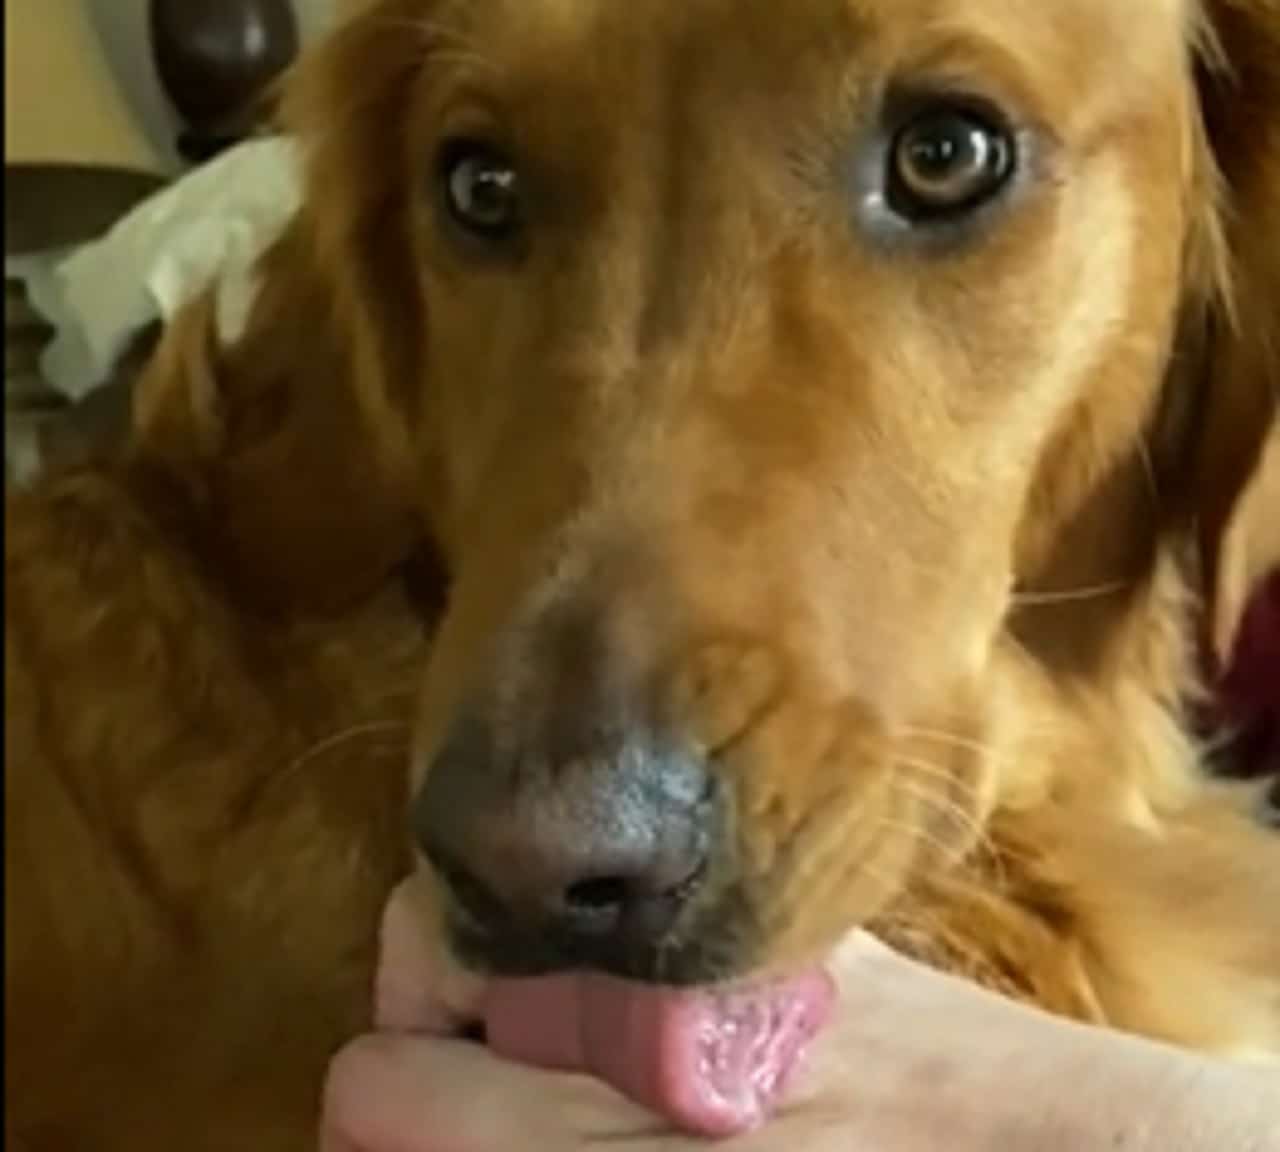 Amusing Dog Comically Stops Mid Lick While Watching TV - Whatsup Doggy Dog